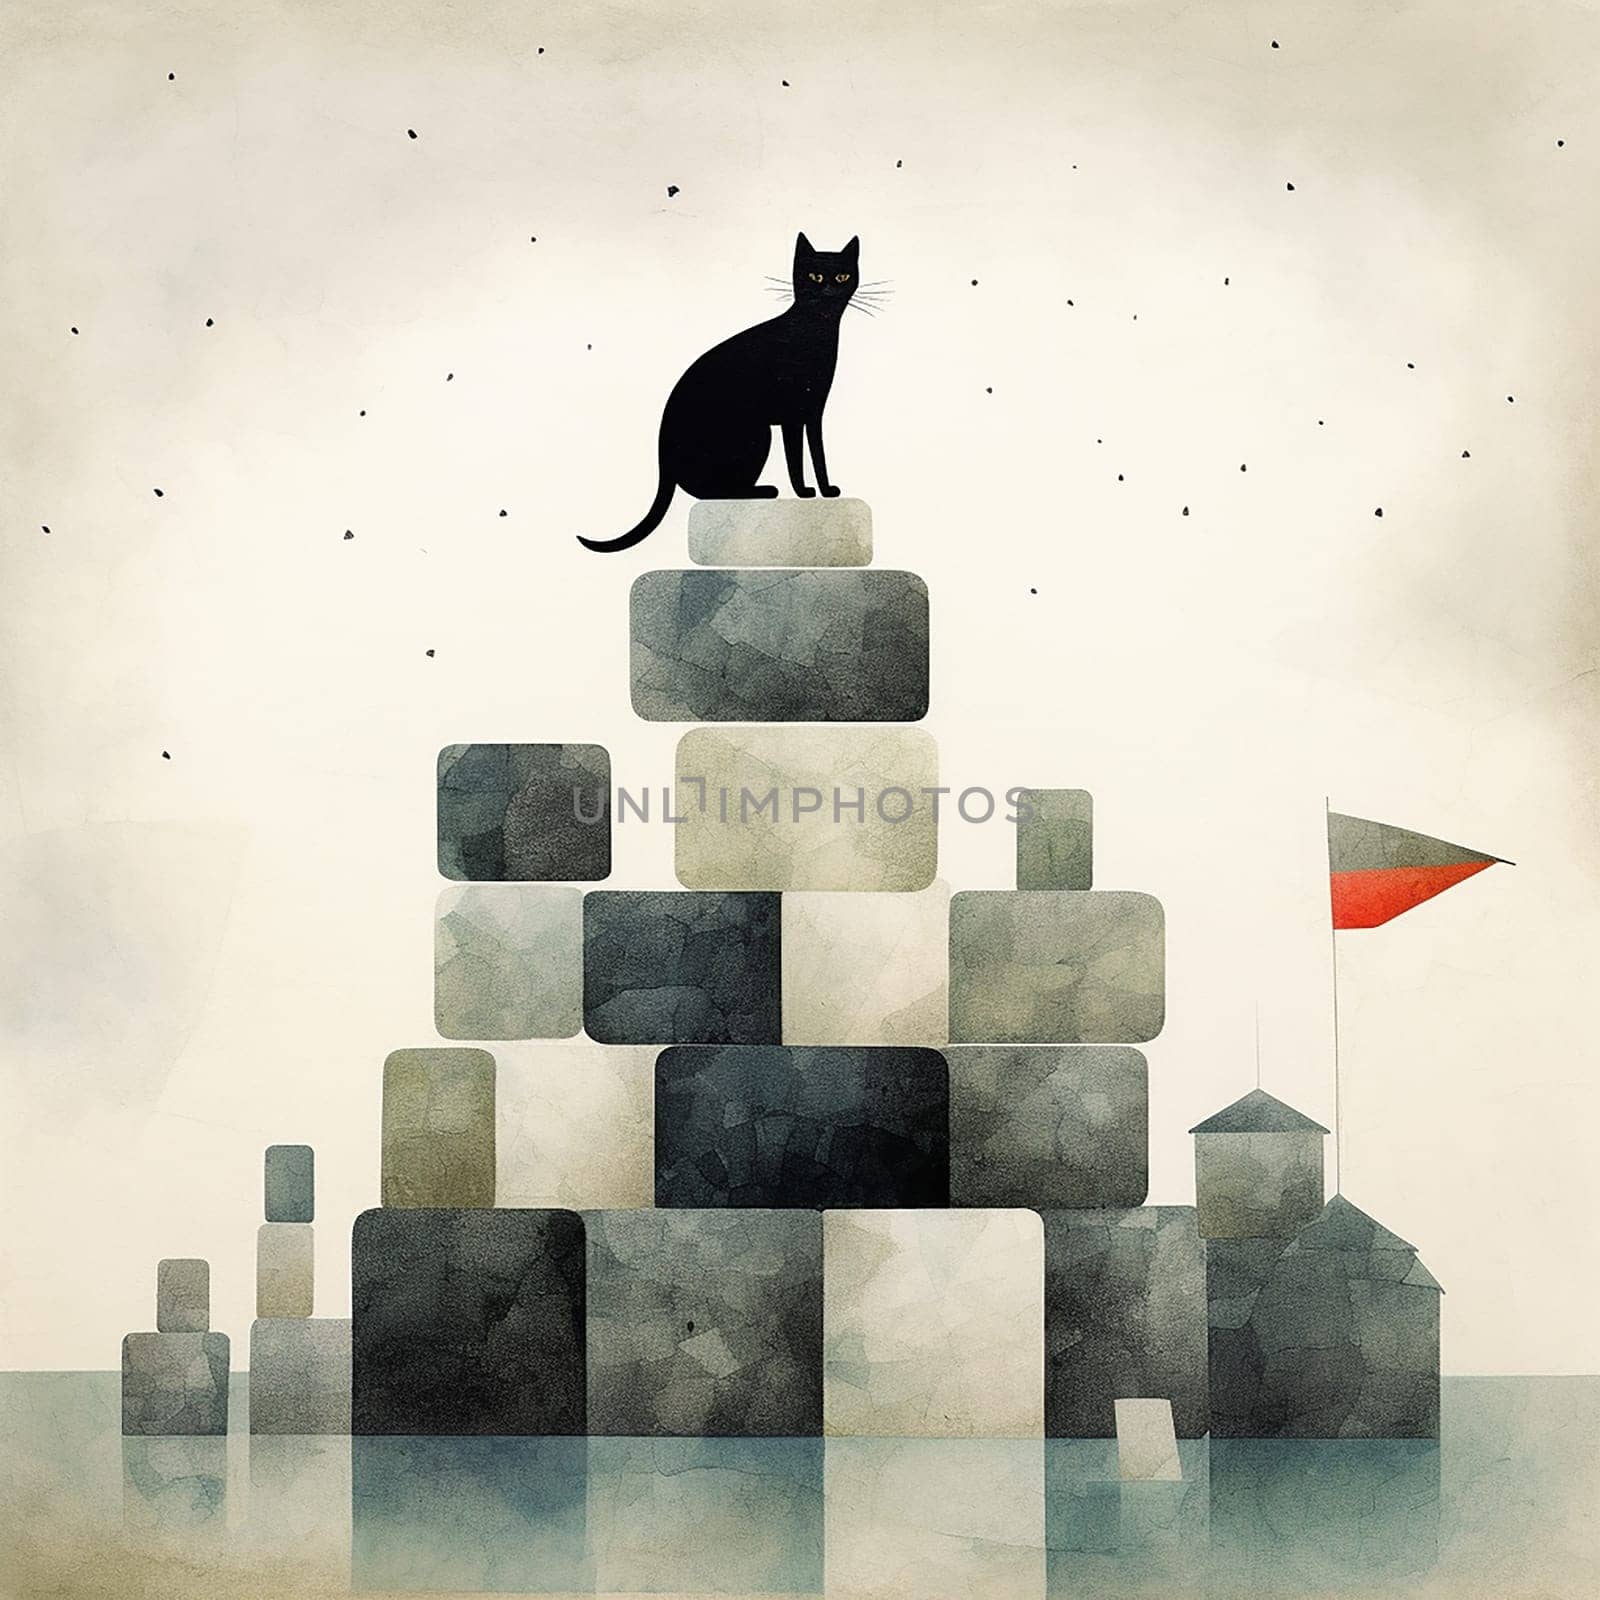 Black cat on top of abstract block structure, abstract background by Hype2art